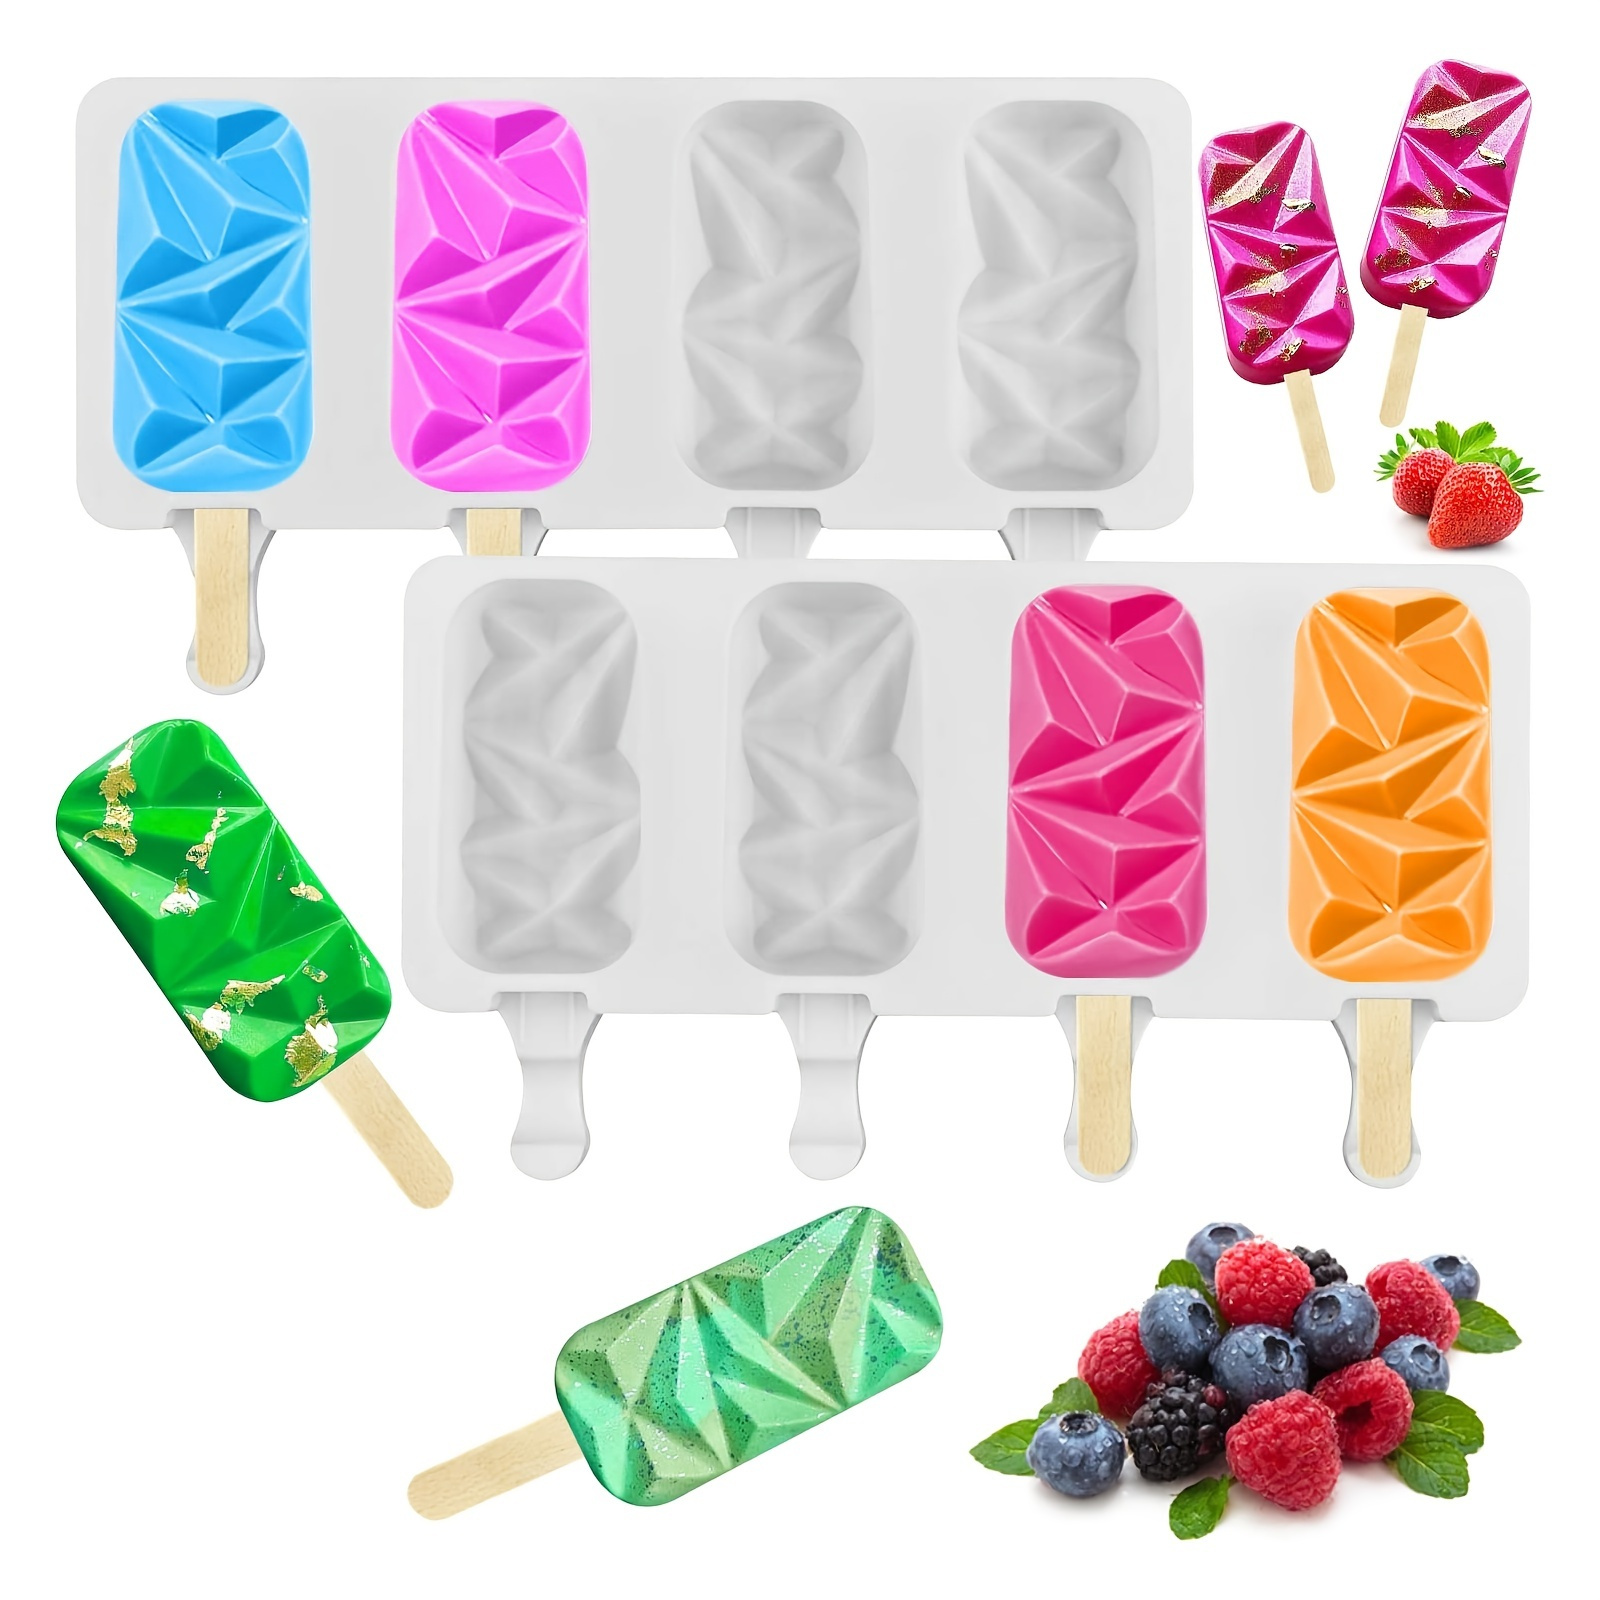 

1pc Silicone Popsicle Molds For Cake Pop, Small 4 Cavities Bpa Free Oval Ice Pop Maker Molds For Diy Ice Cream, Summer Cake Pop, Cakesicles